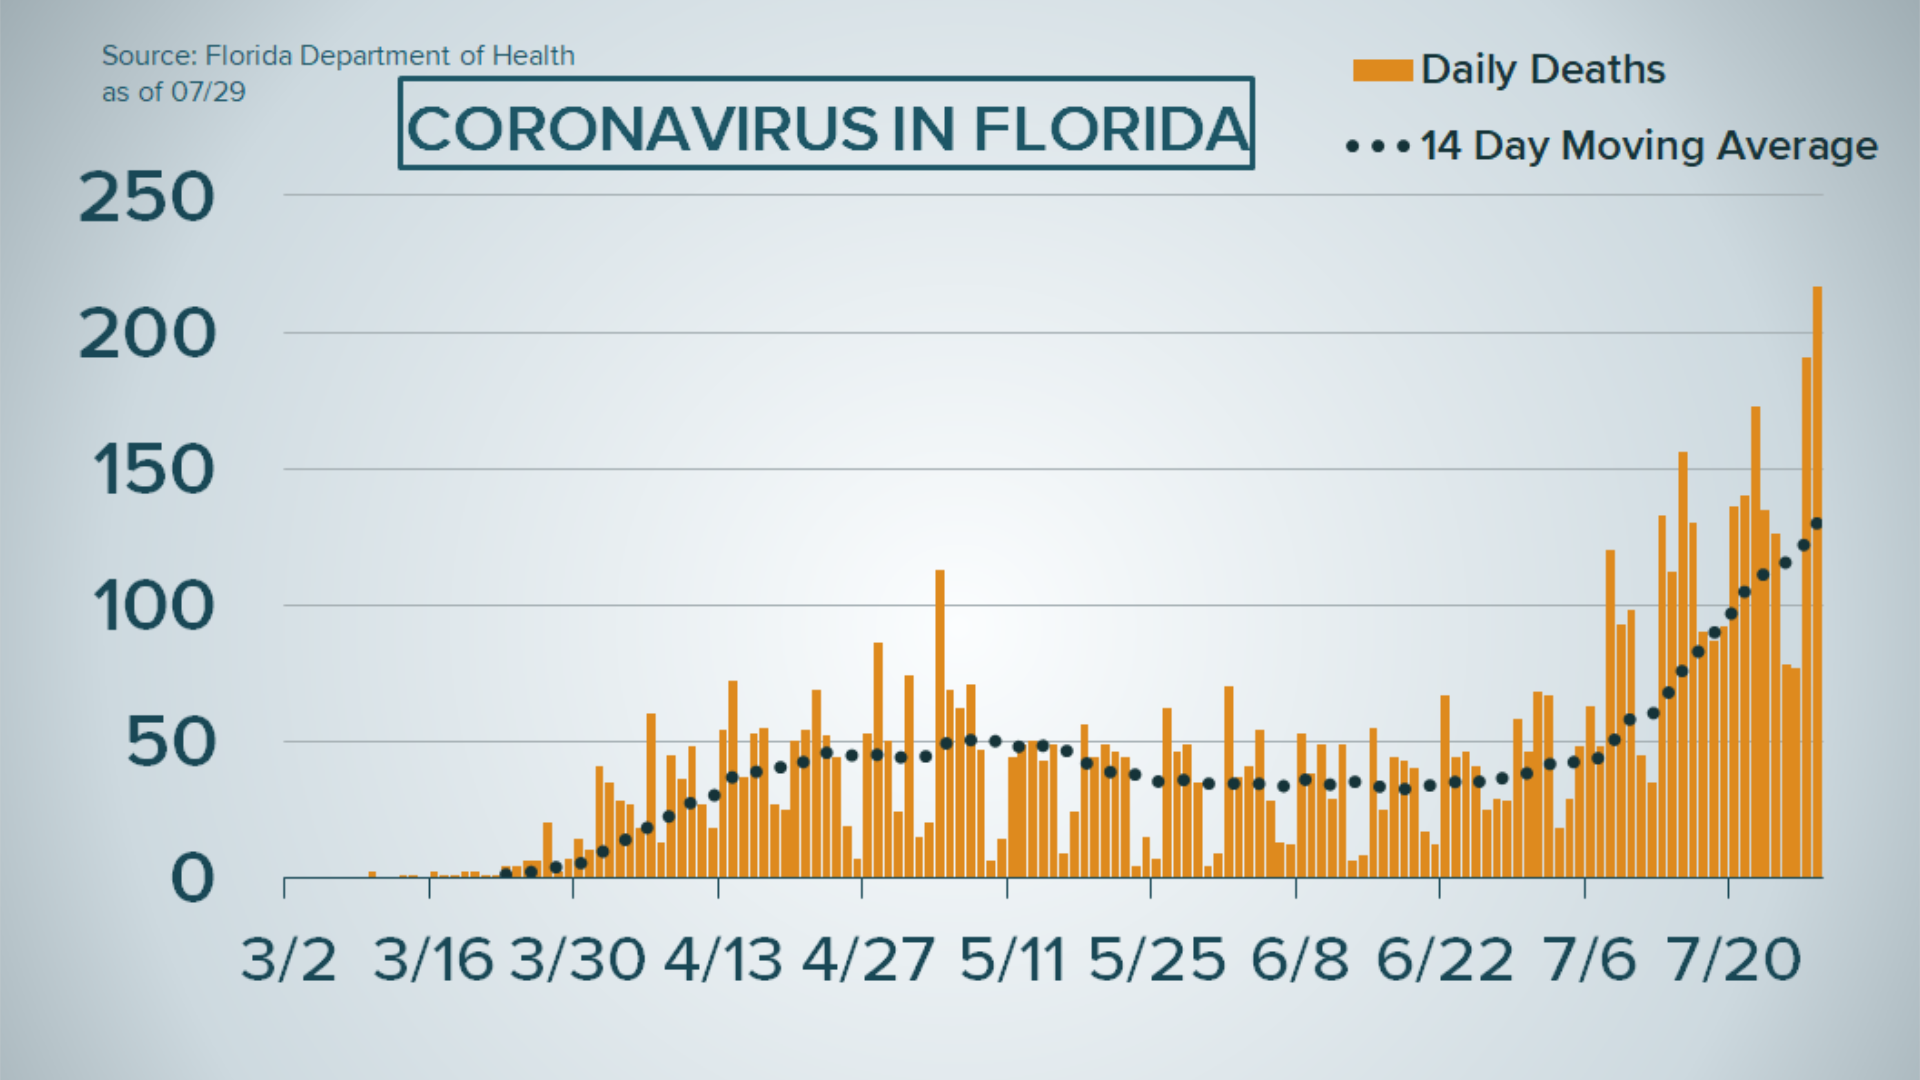 Wednesday's report from the Florida Department of Health showed the state added another 9,446 COVID-19 cases for July 28.